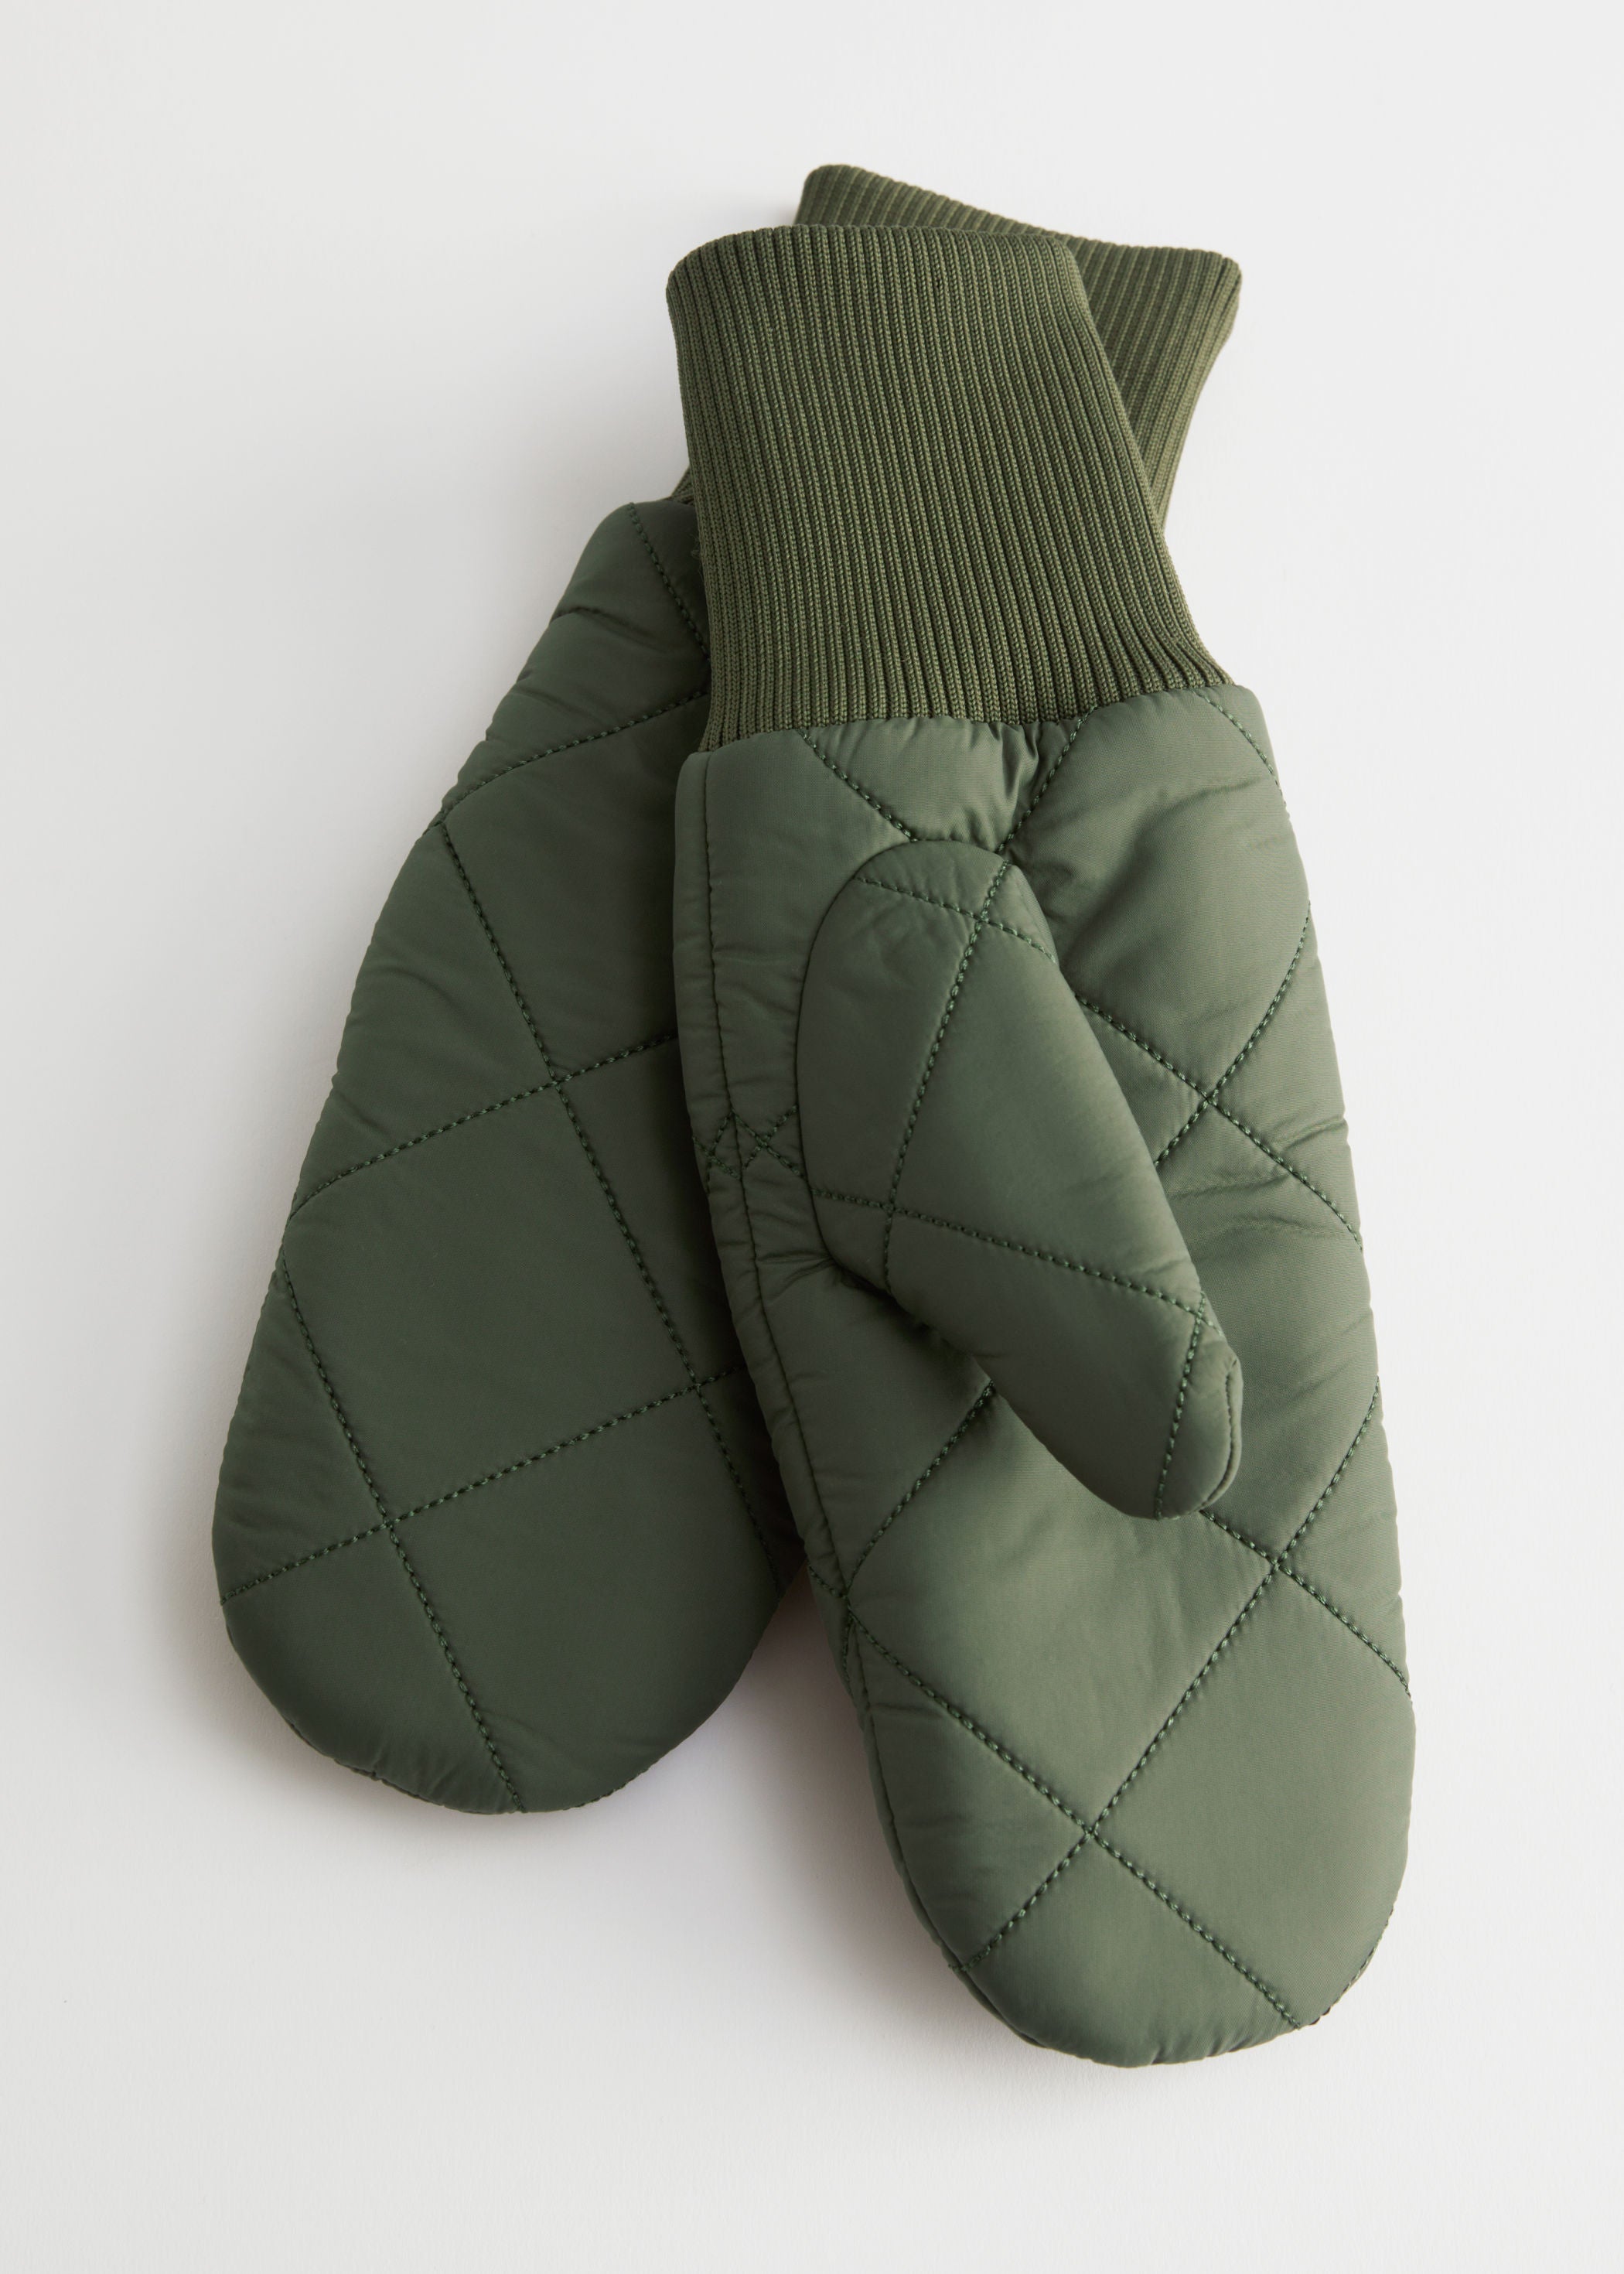 & Other Stories + Diamond Quilted Mittens